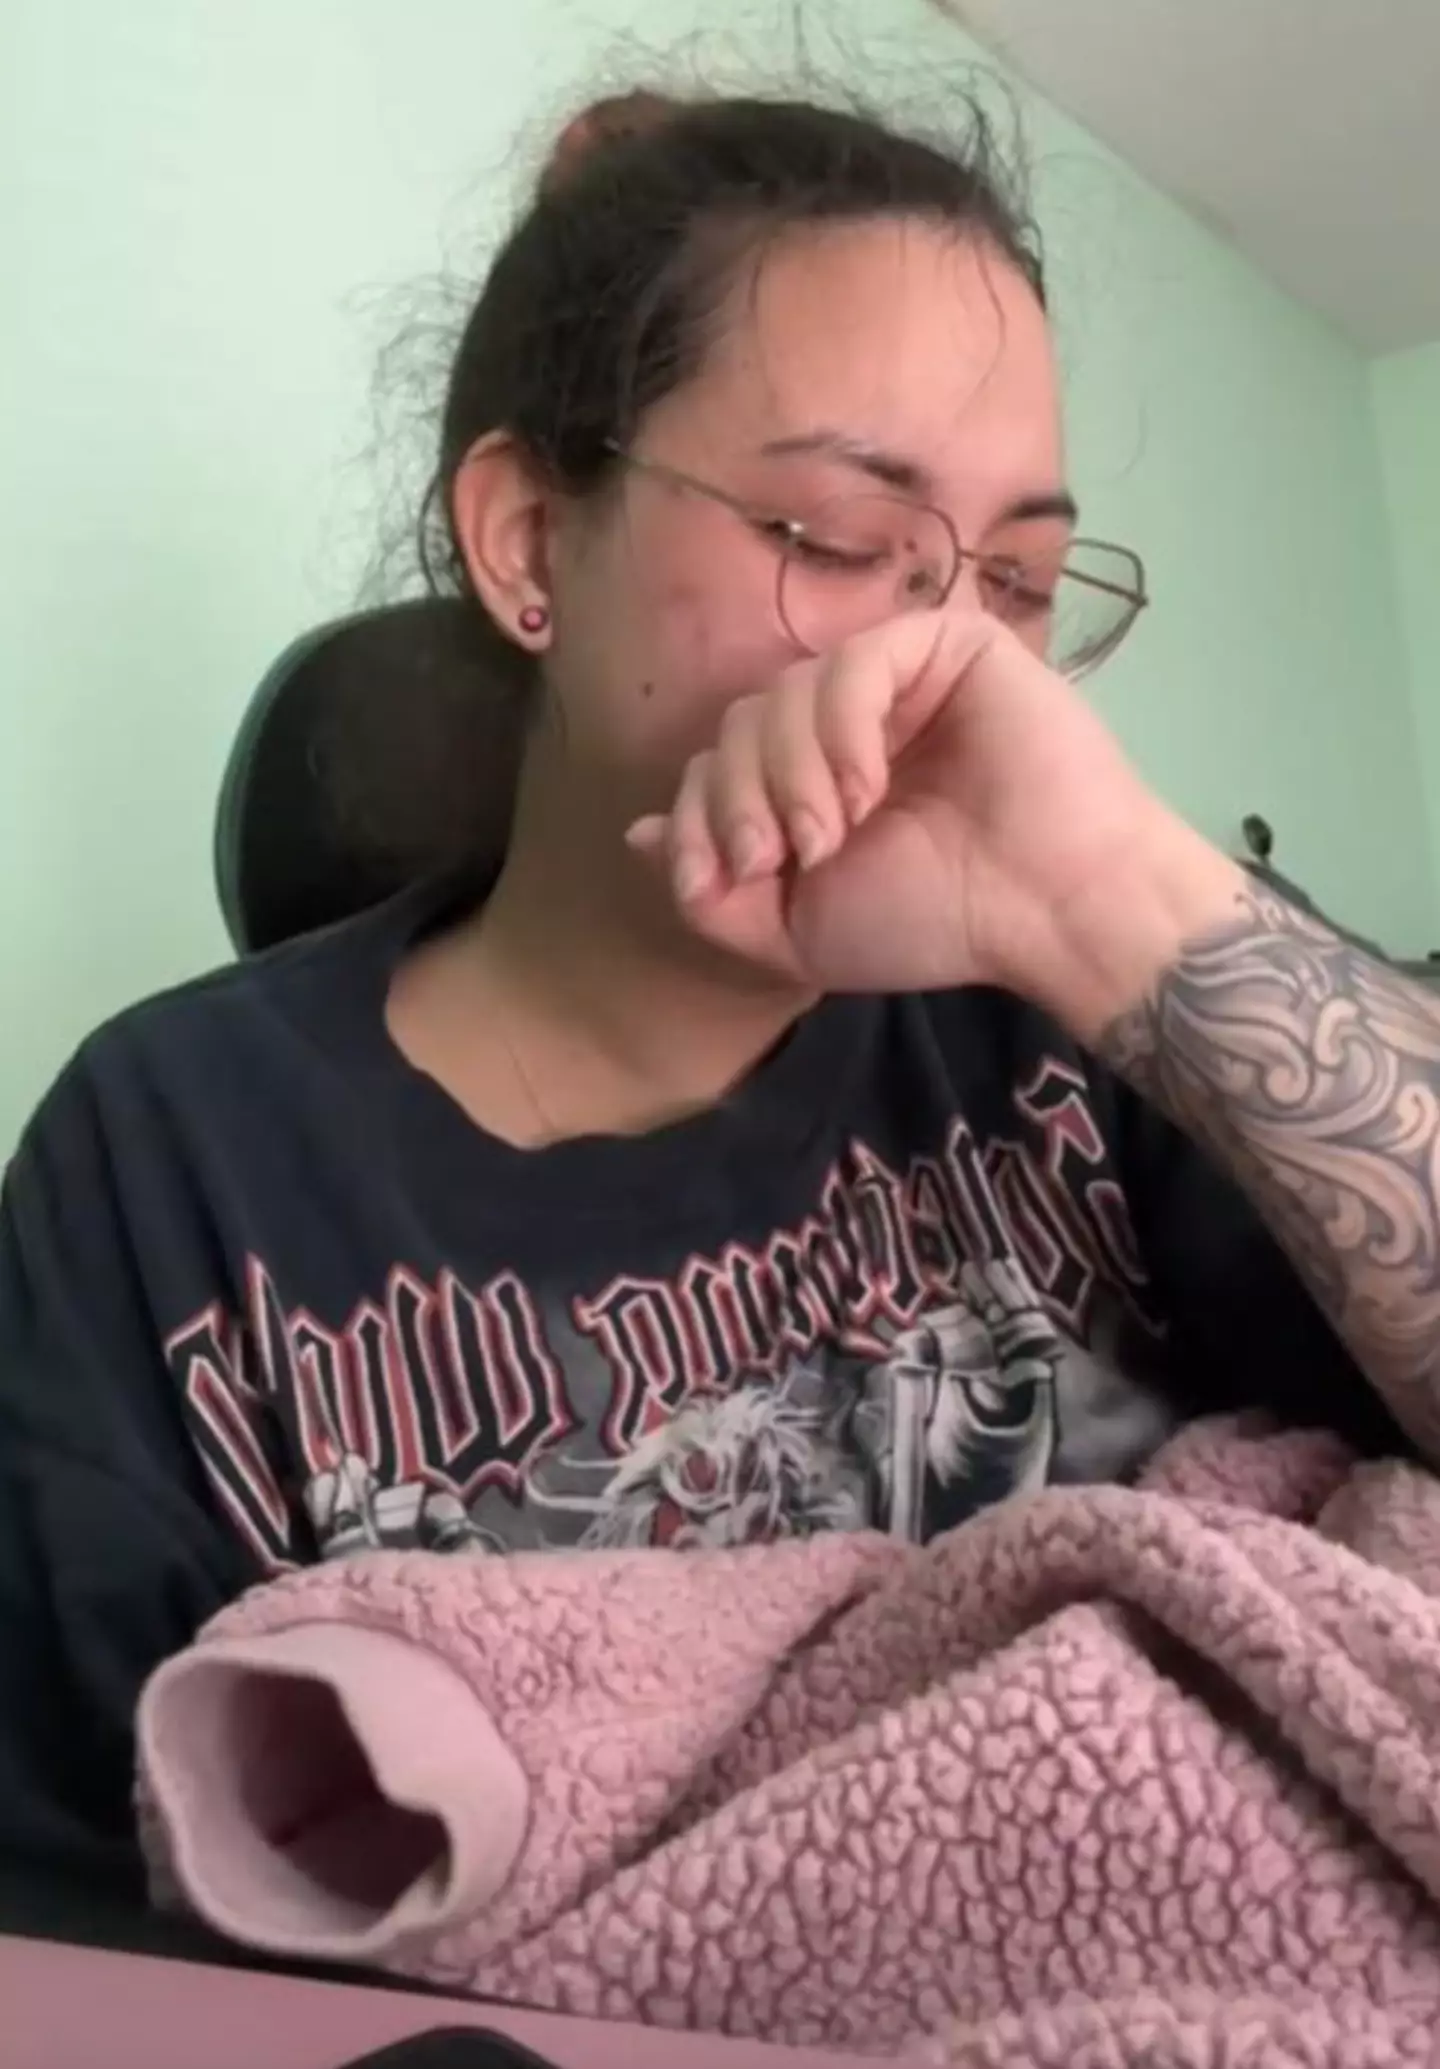 The woman took to TikTok to issue a heartbreaking warning to dog owners.